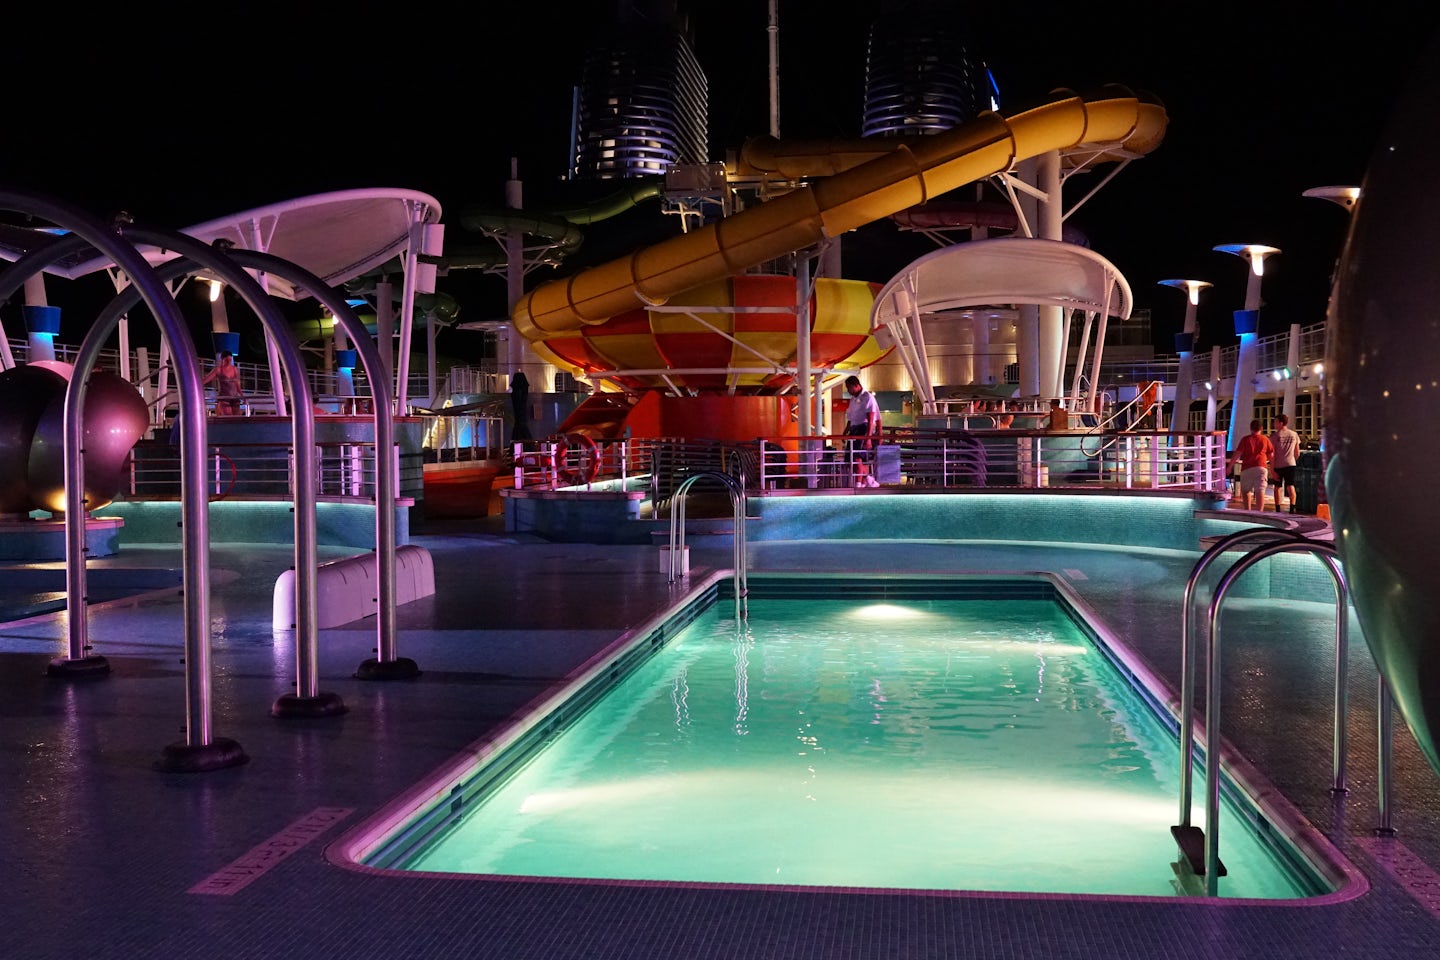 Deck 15 pool area at night